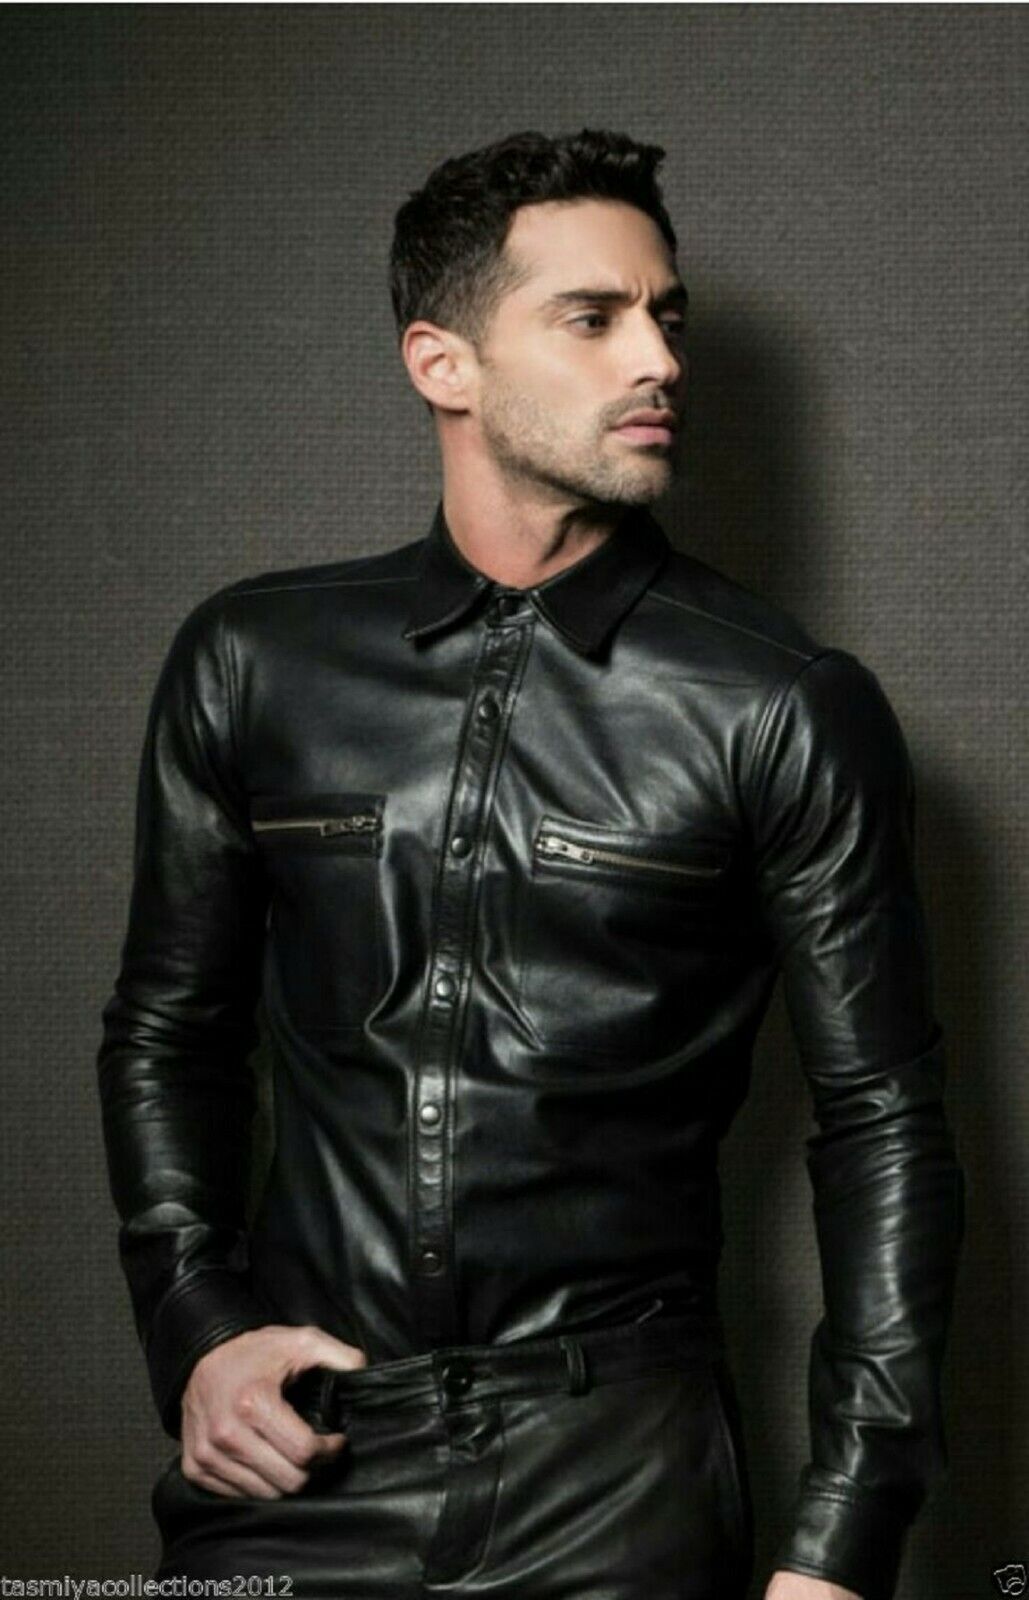 Primary image for 100%Real Handmade Men Black Shirt Party Lambskin Formal Stylish Casual Leather